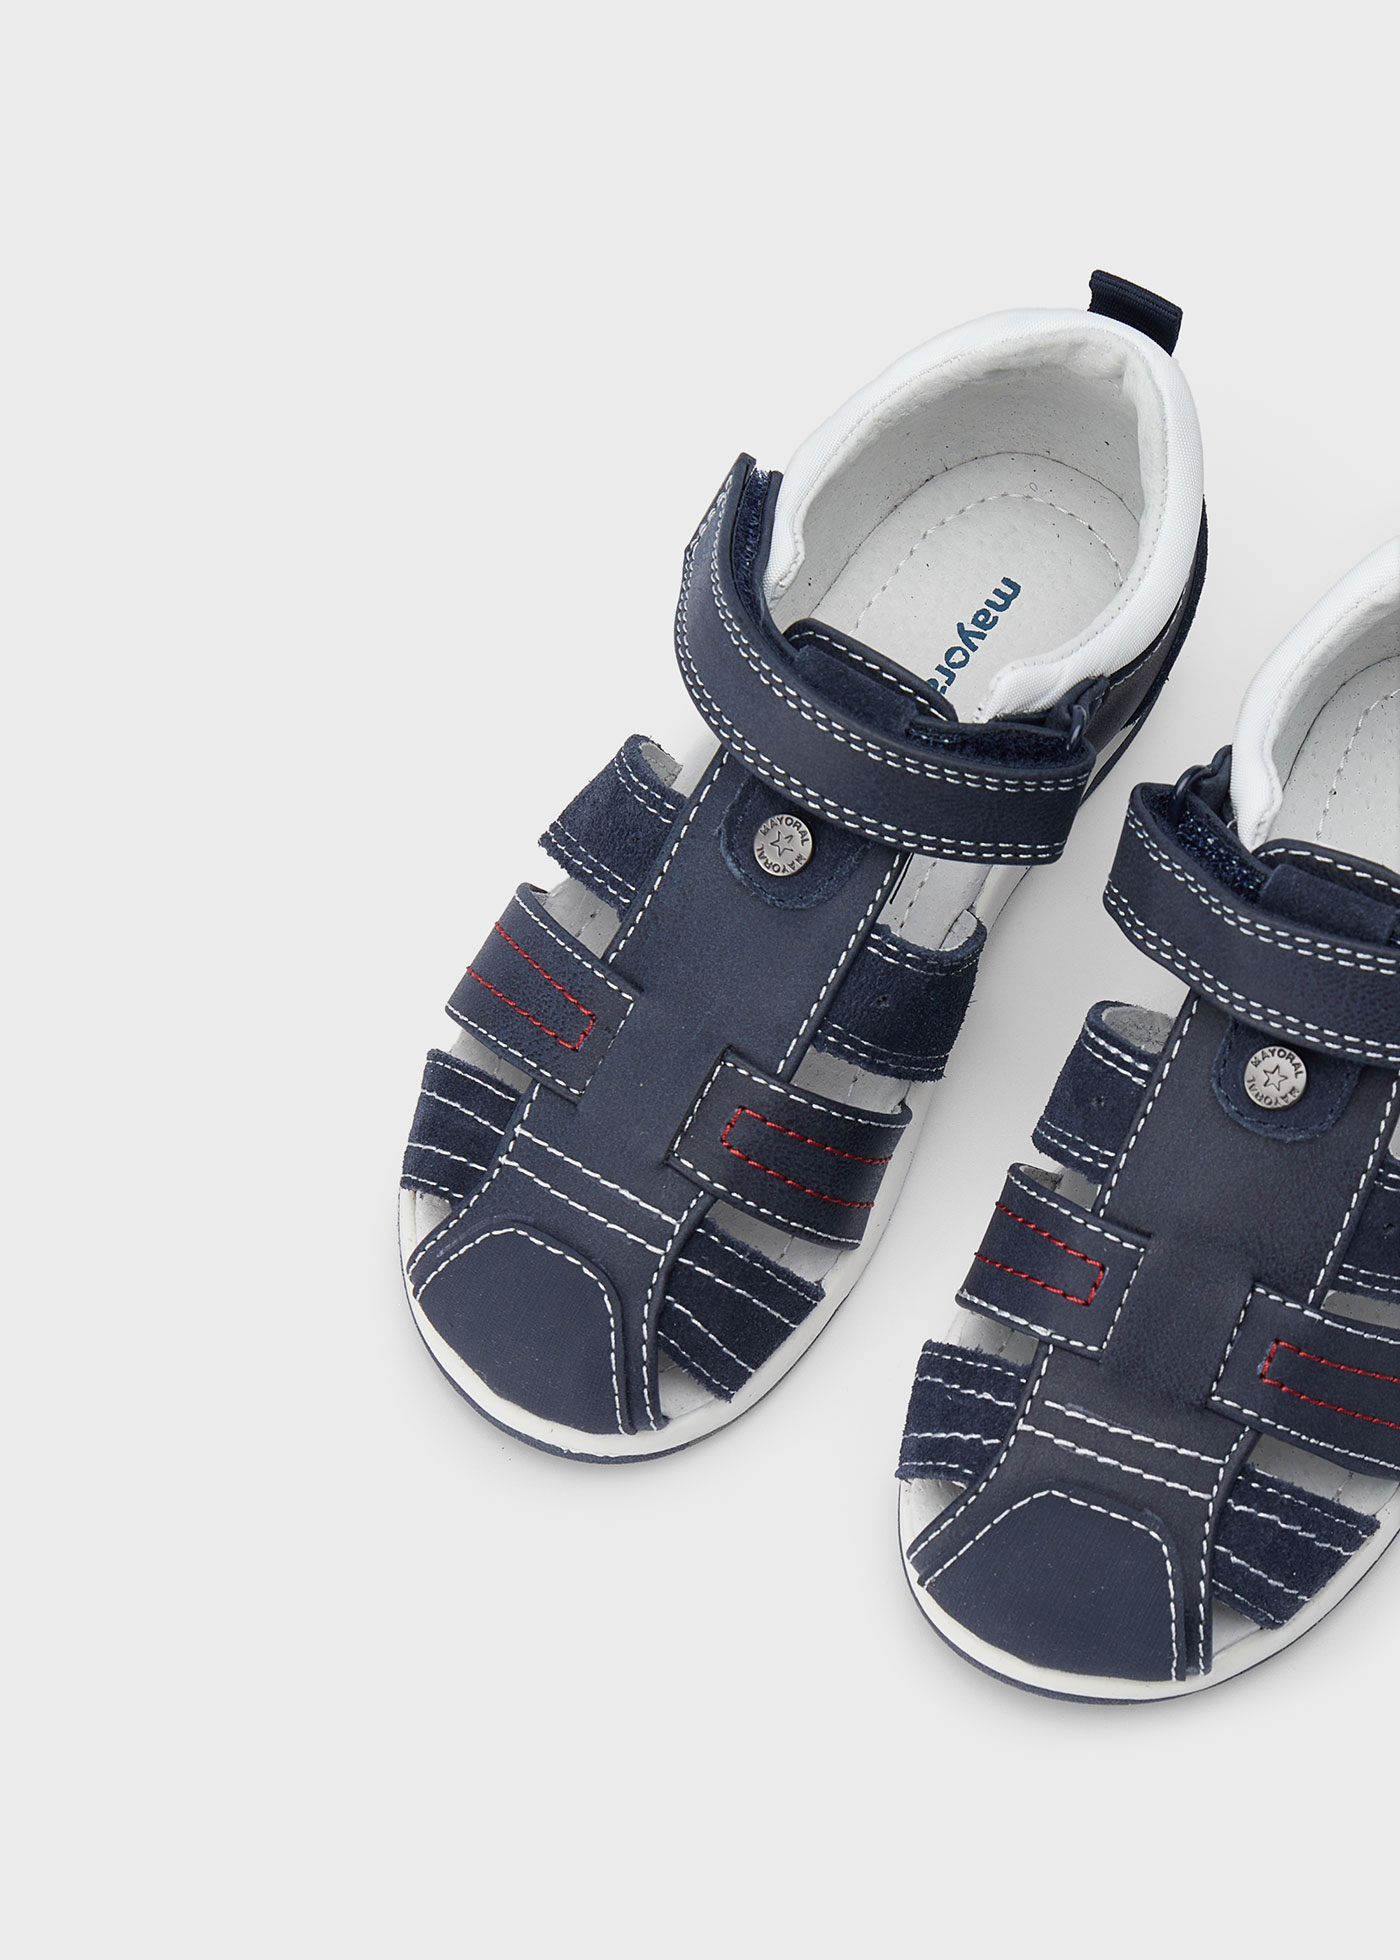 Boys sustainable leather sandals